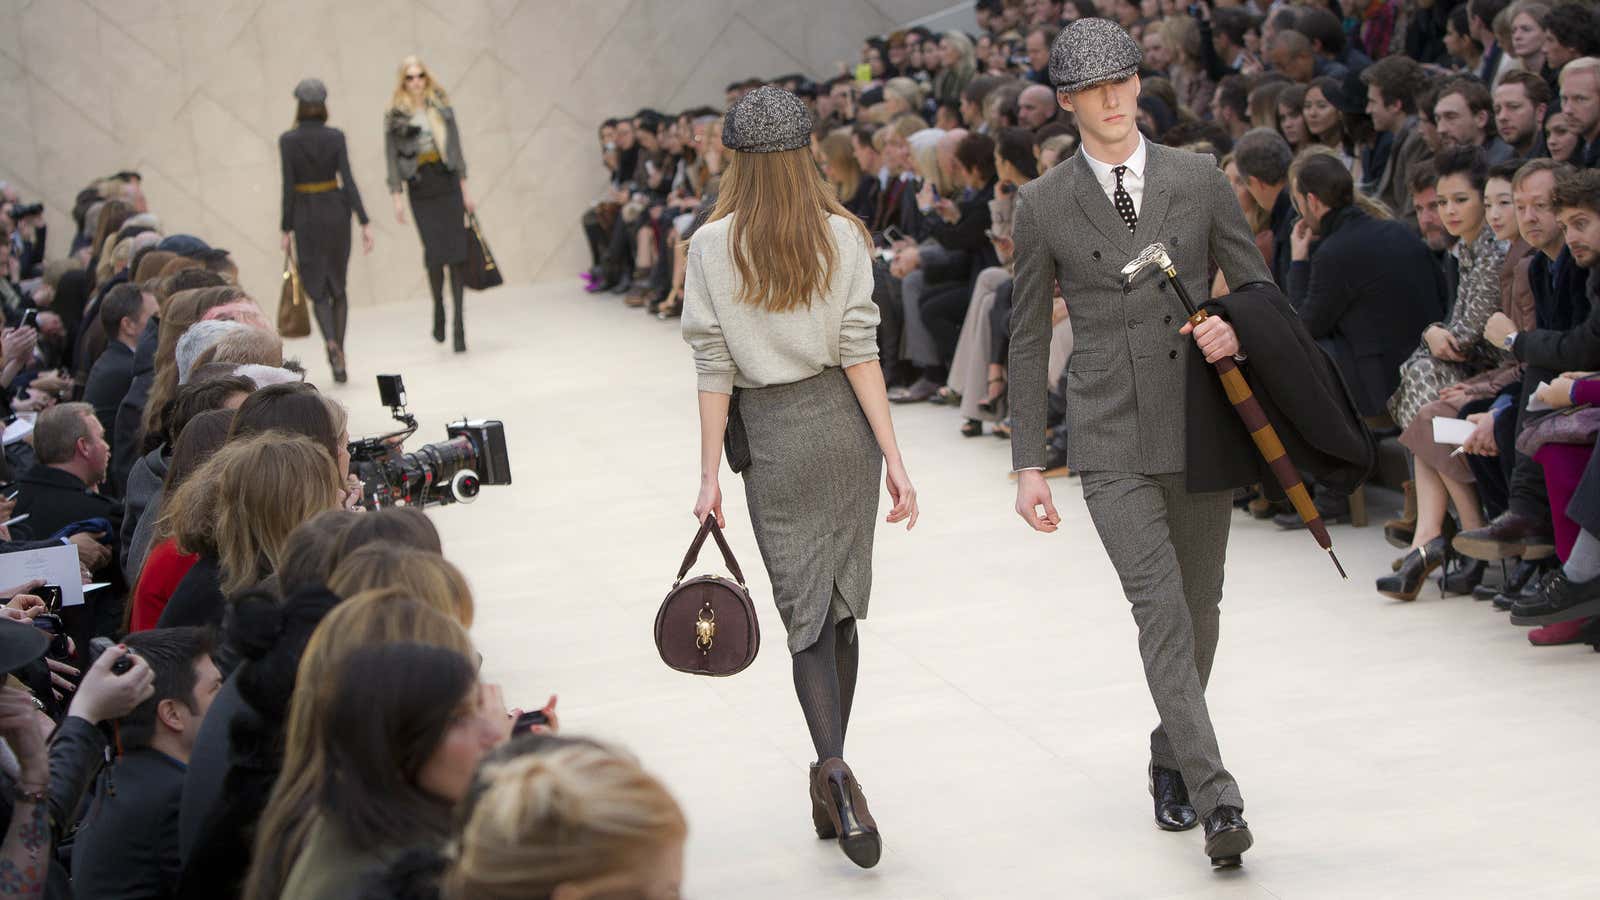 He said, she said. To appeal to younger customers, Burberry has shifted some management power to younger workers.